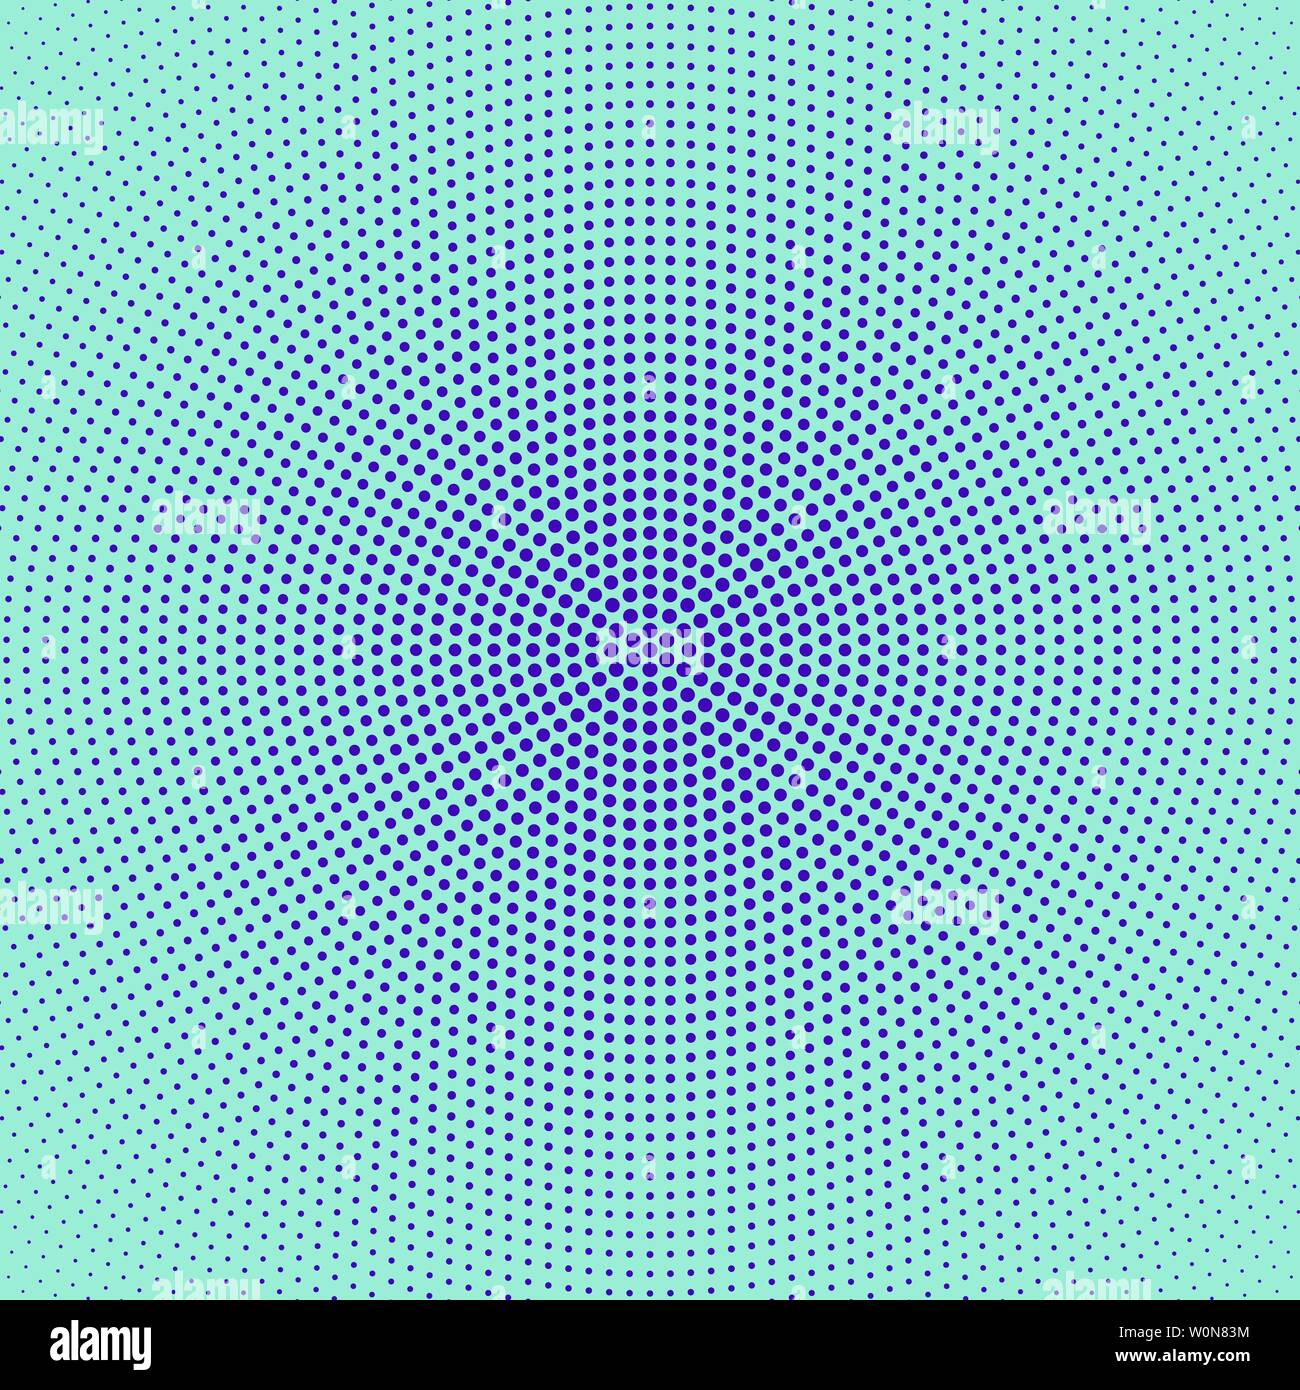 Halftone geometric circular dot pattern background - abstract vector design from dots Stock Vector